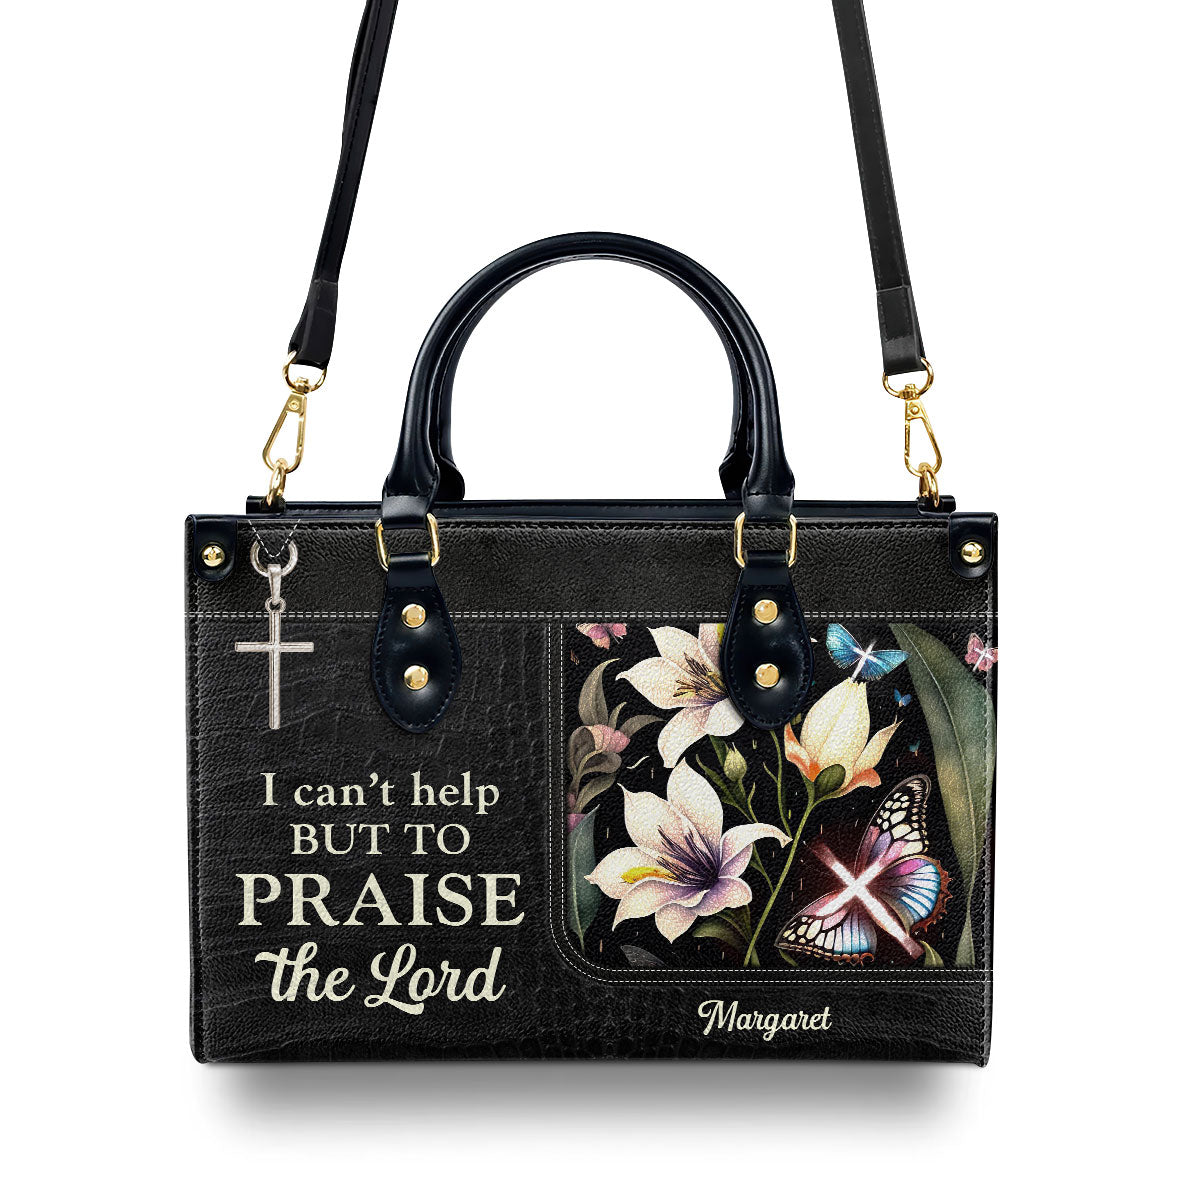 Personalized Zippered Leather Handbag With Handle Religious Gift For Worship Friends I Can't Help But To Praise The Lord